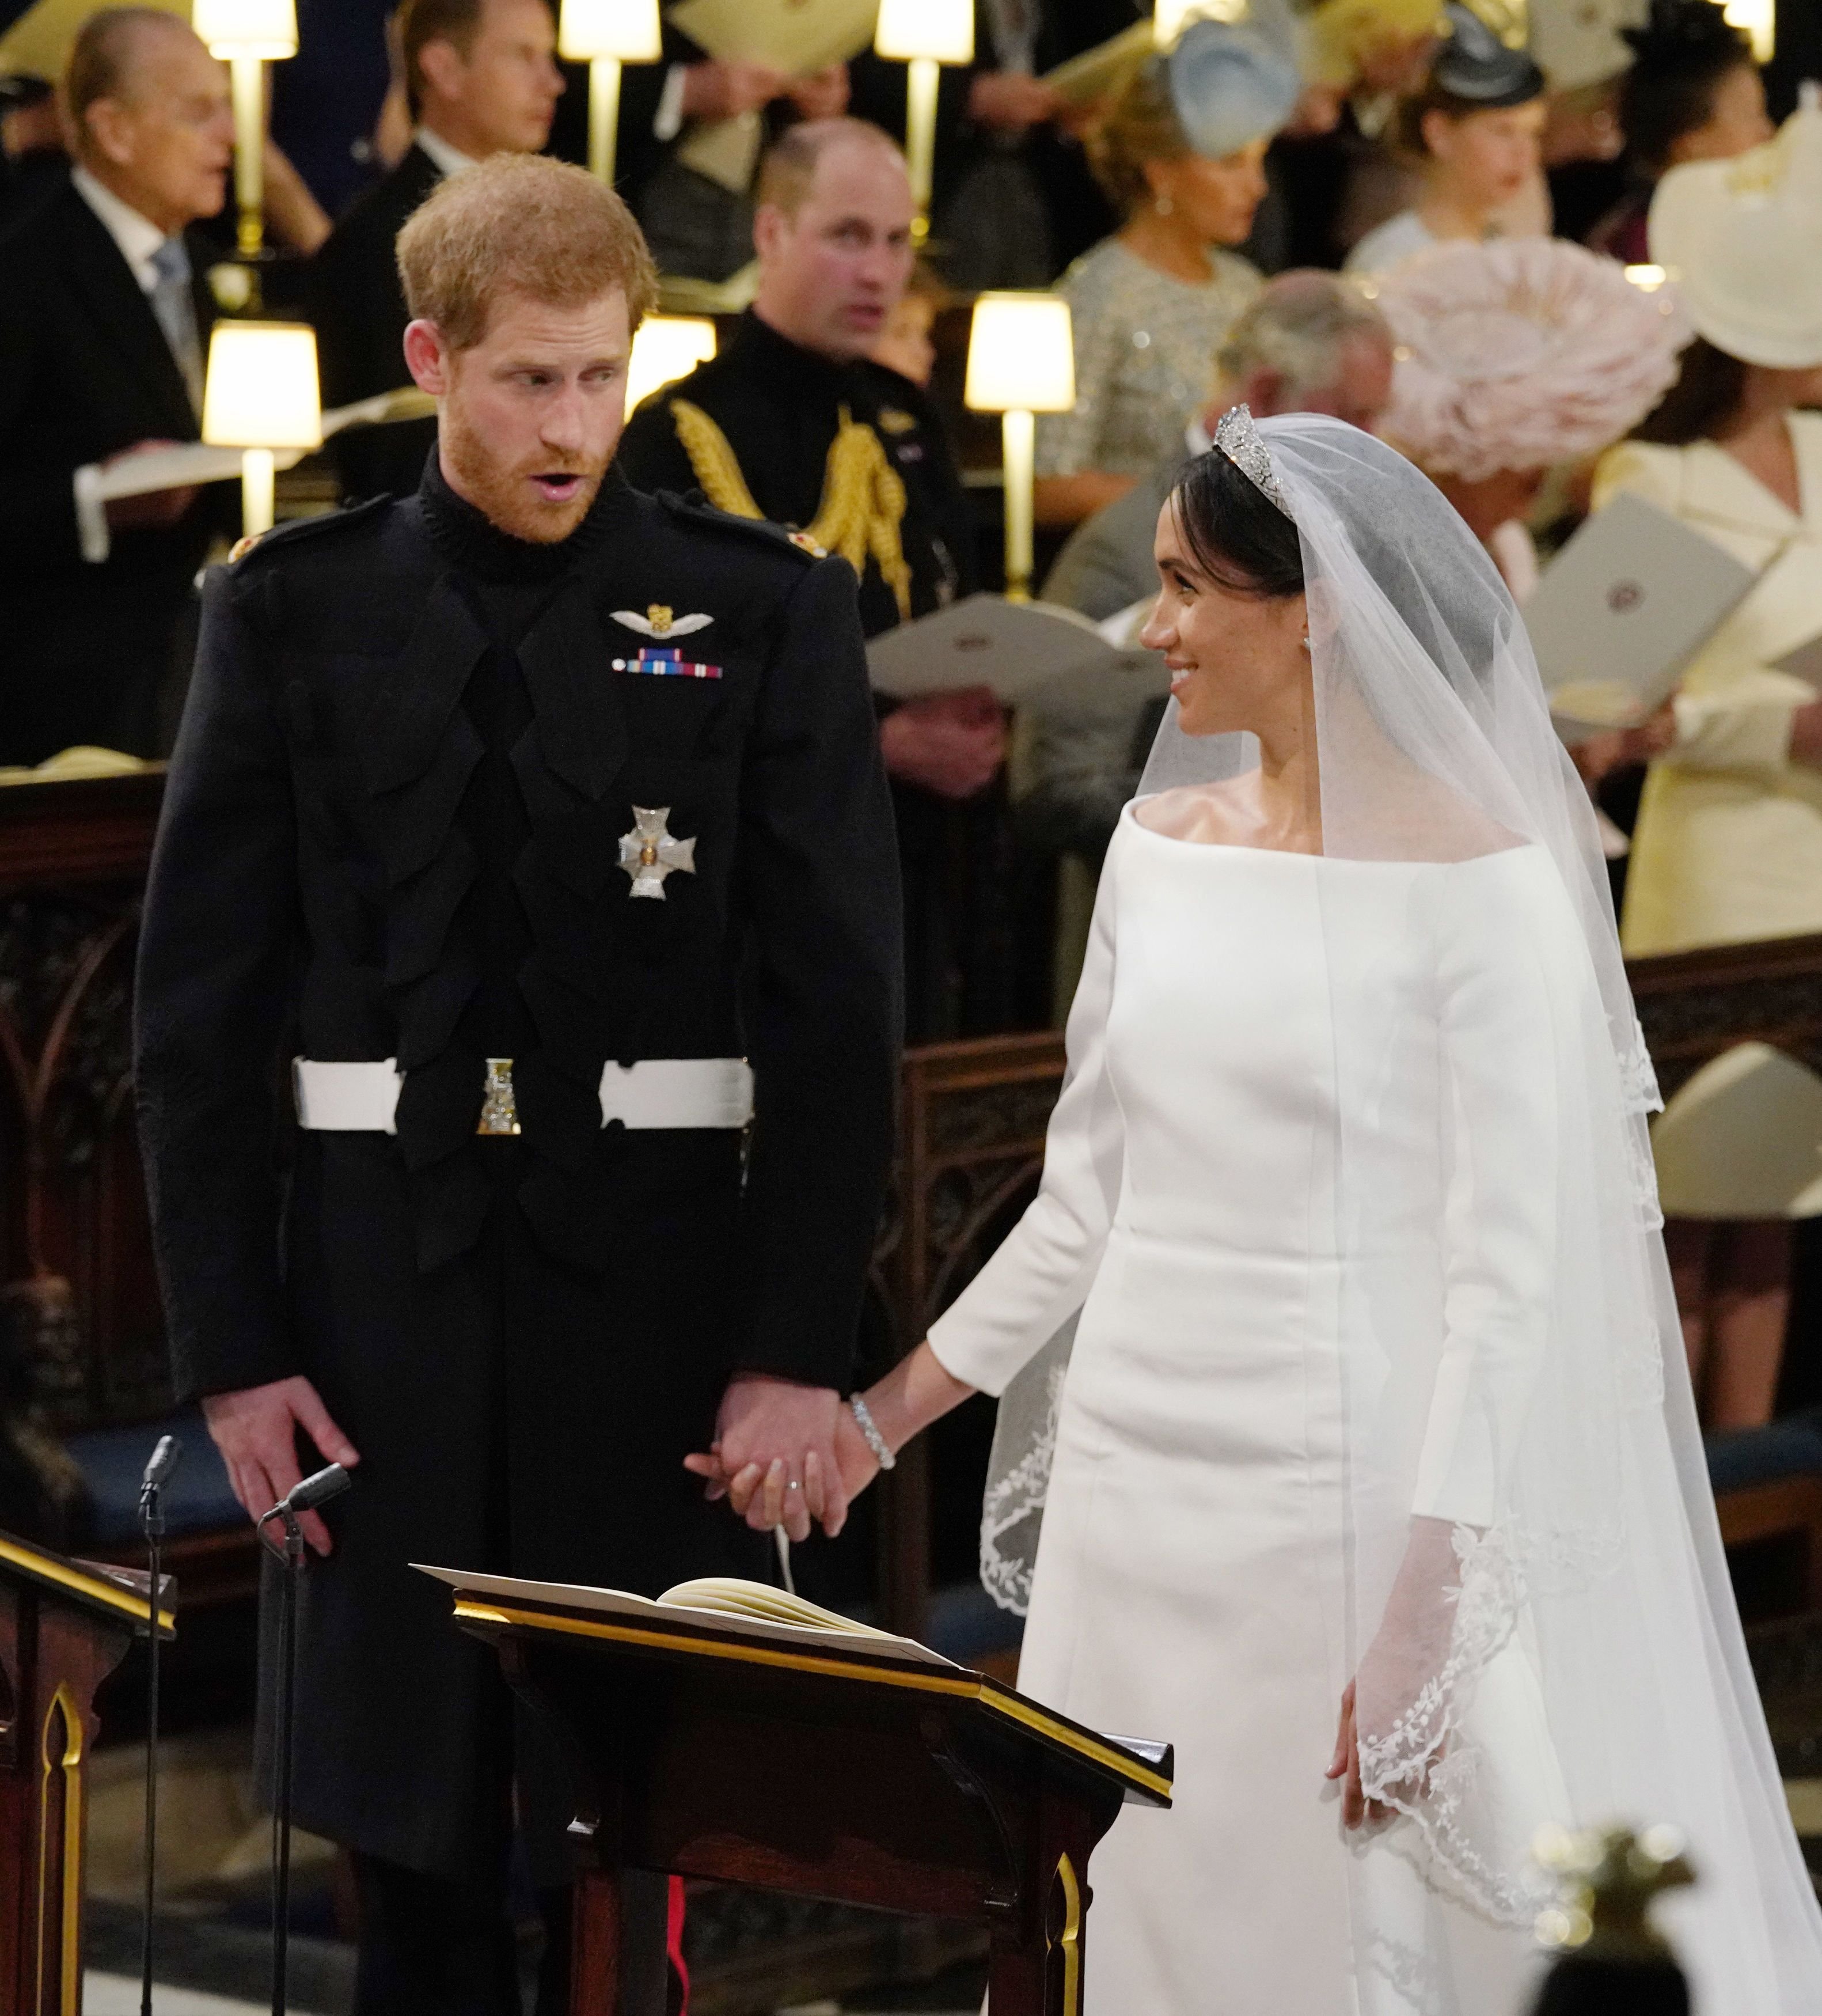 Prince Harry with Meghan Markle during their wedding in St George's Chapel at Windsor Castle on May 19, 2018, in Windsor, England. | Source: Jonathan Brady - WPA Pool/Getty Images